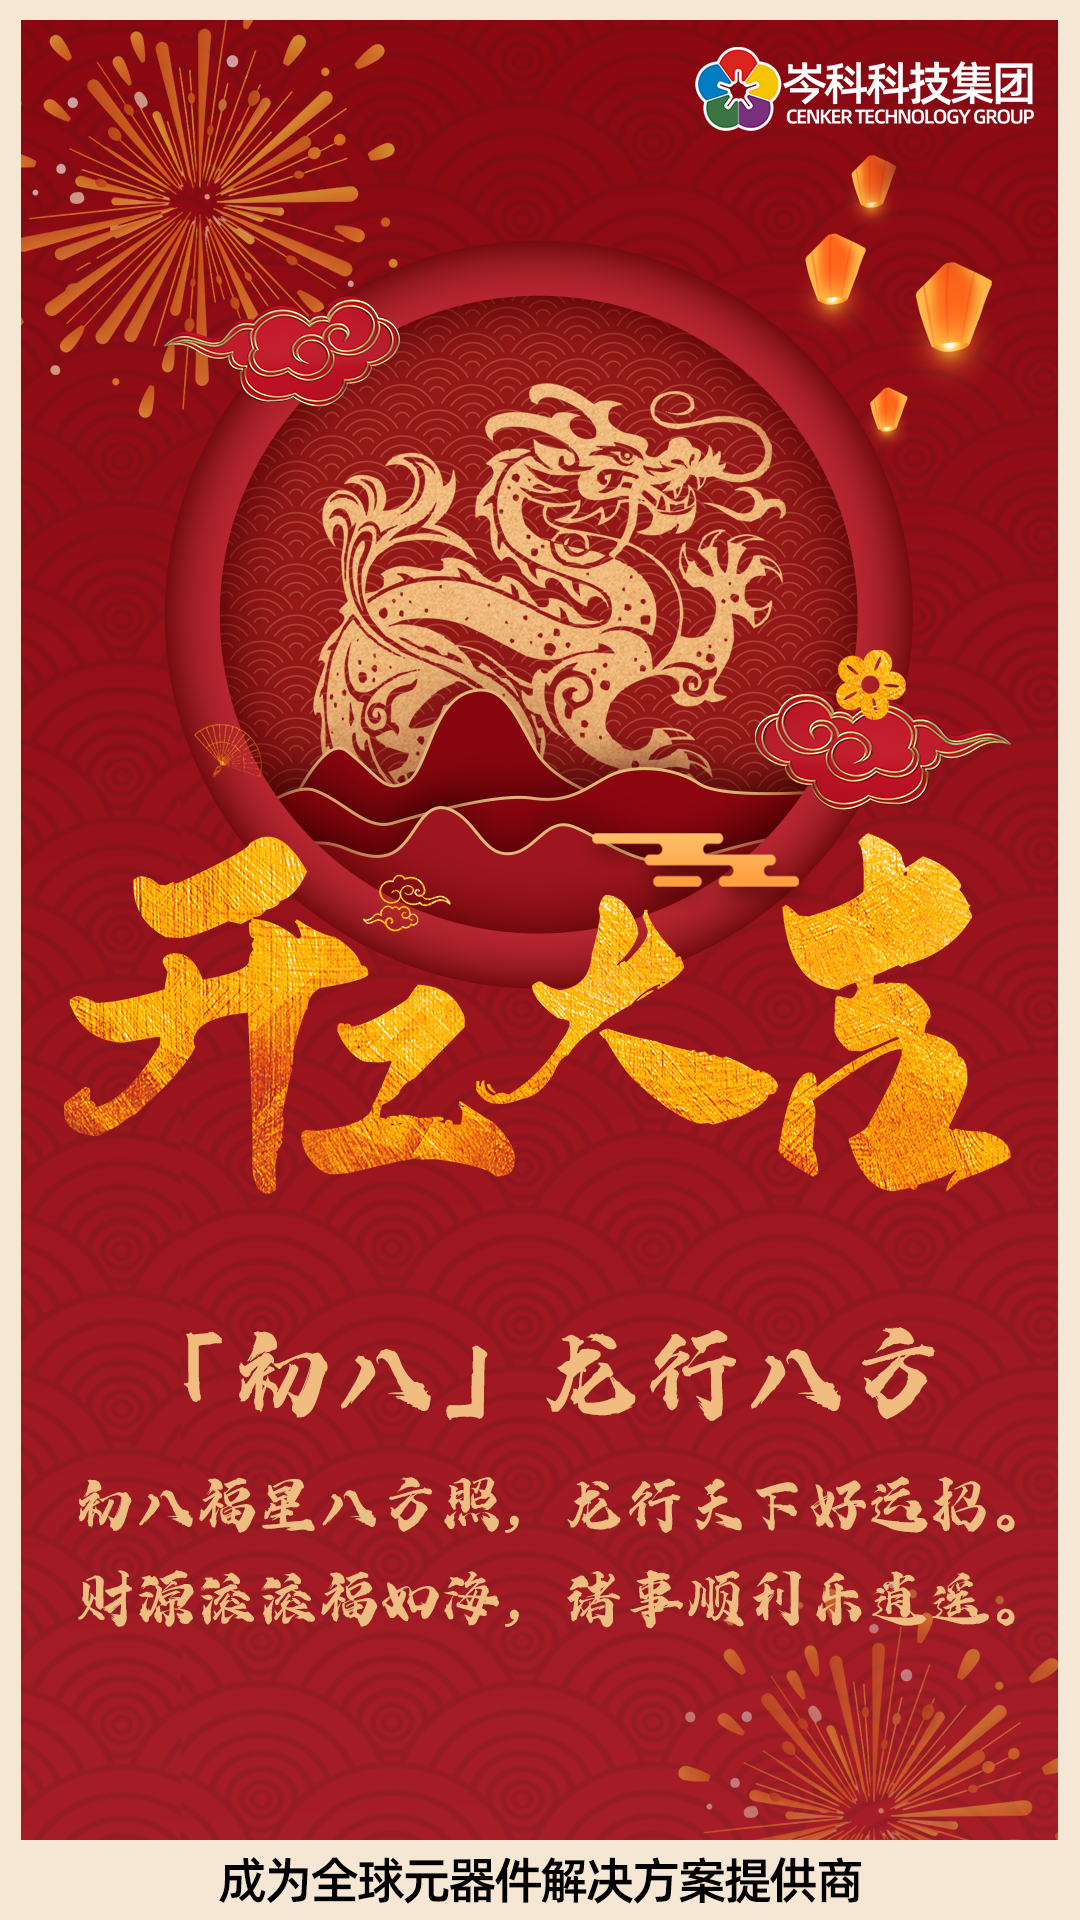 The Eighth Day of the Chinese New Year | Dragons Move in All Directions, Auspicious Start of Work!